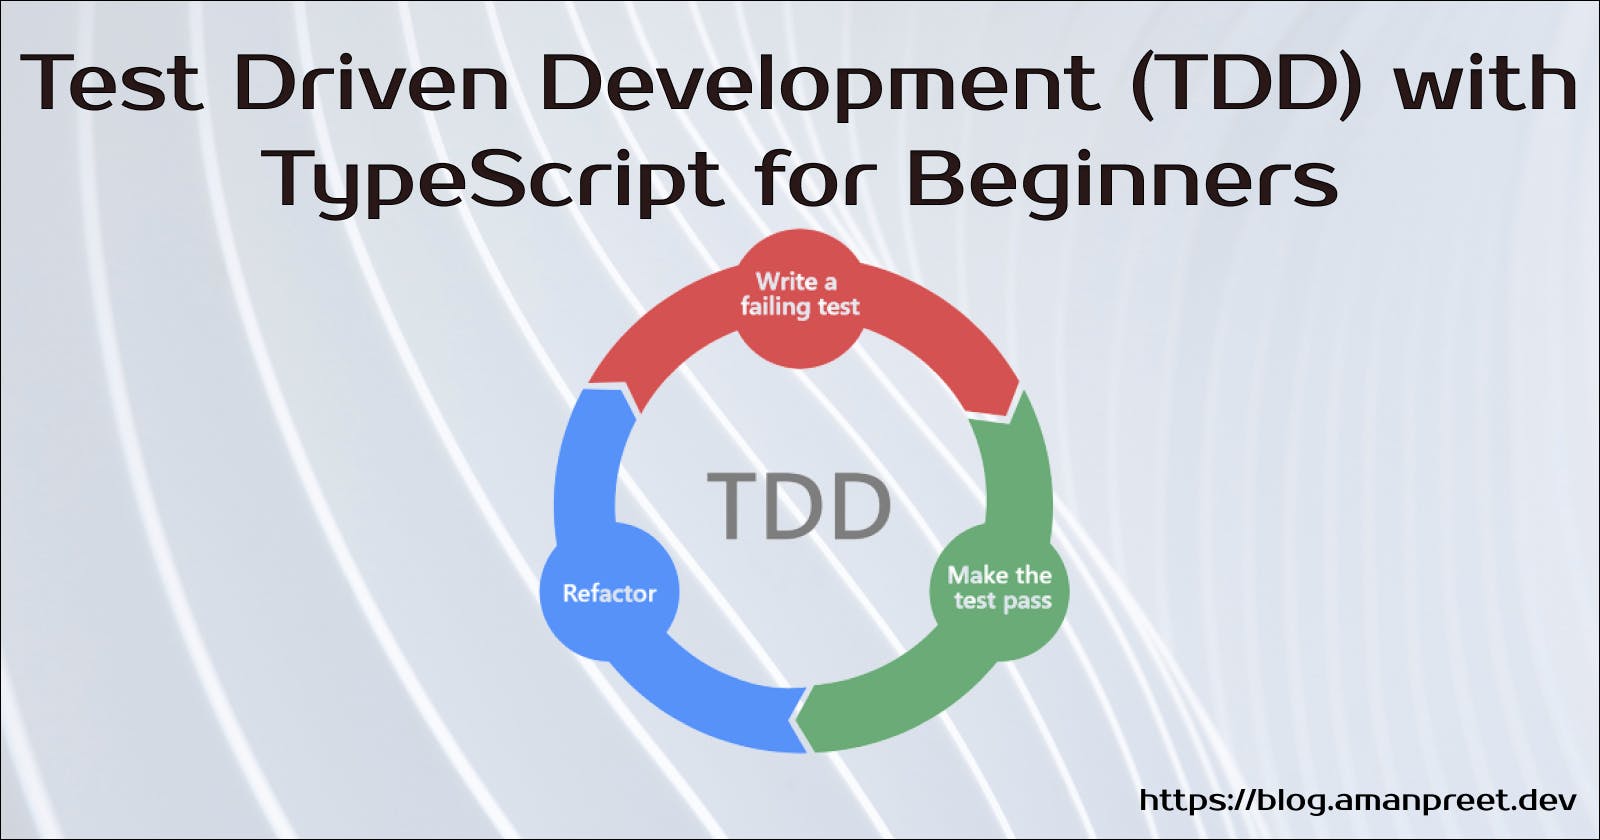 Test-Driven Development (TDD) with TypeScript for Beginners